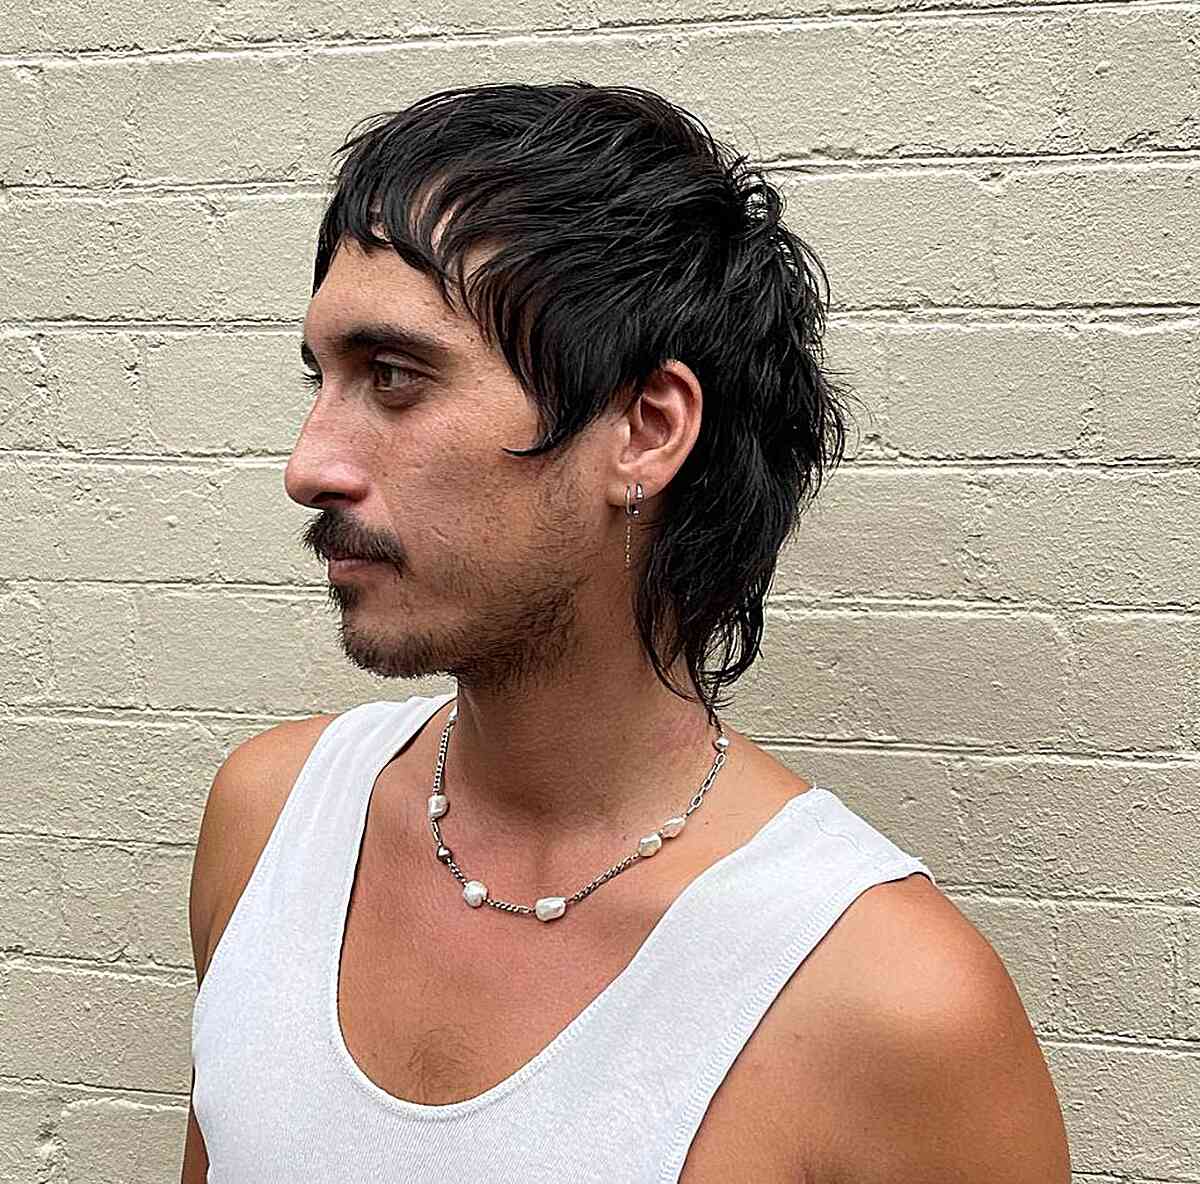 Waved Mullet Style with Side Burns for Guys